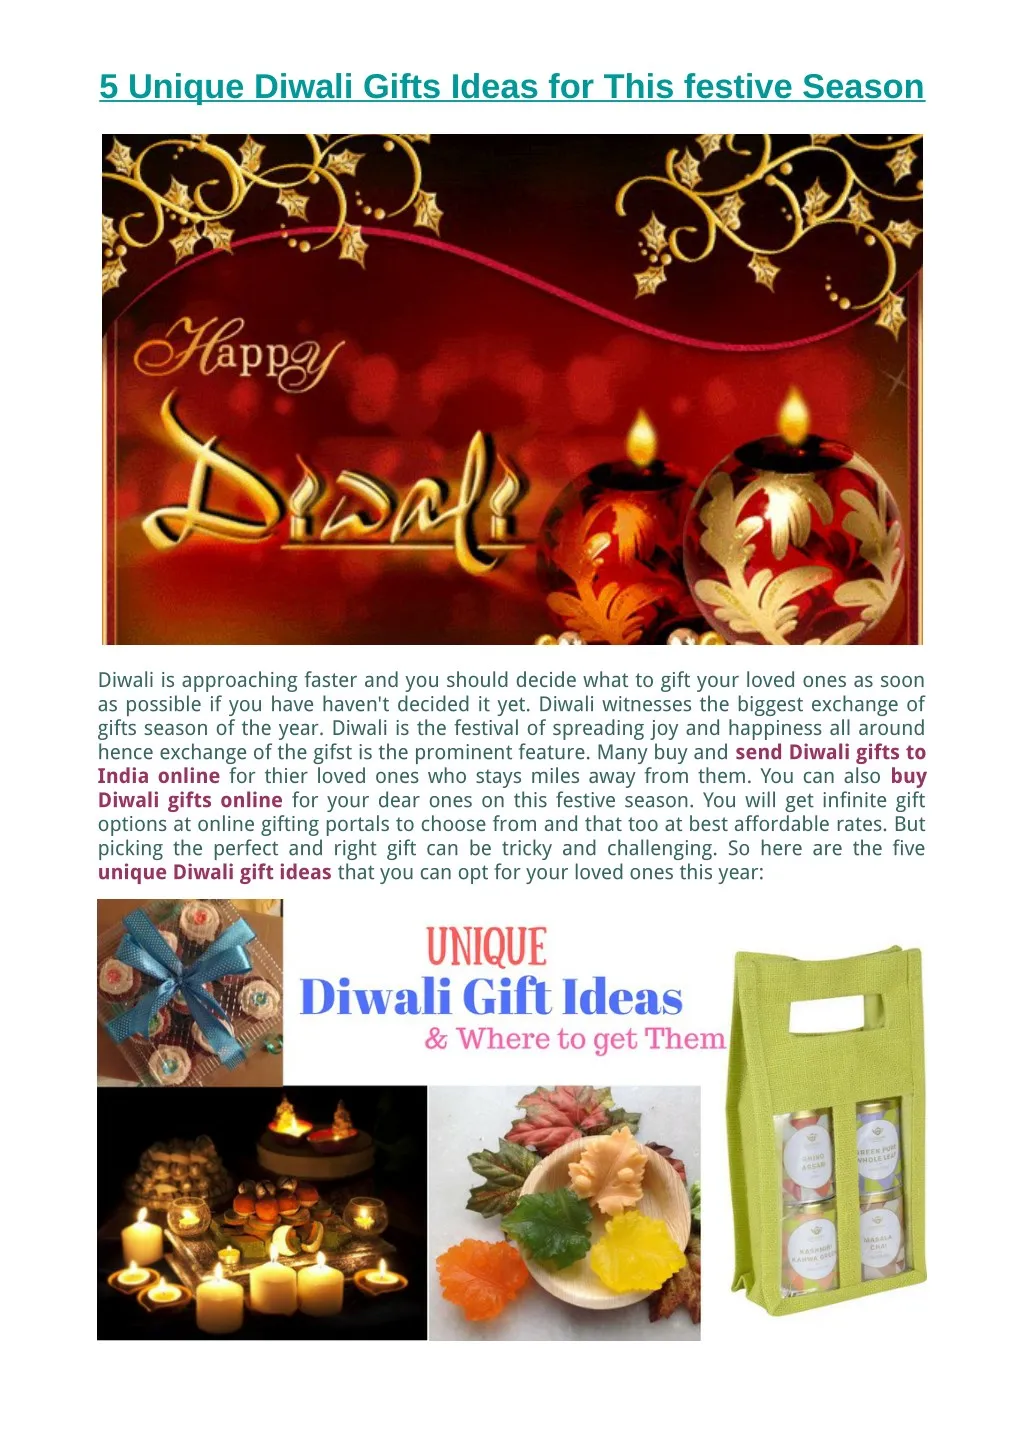 5 unique diwali gifts ideas for this festive